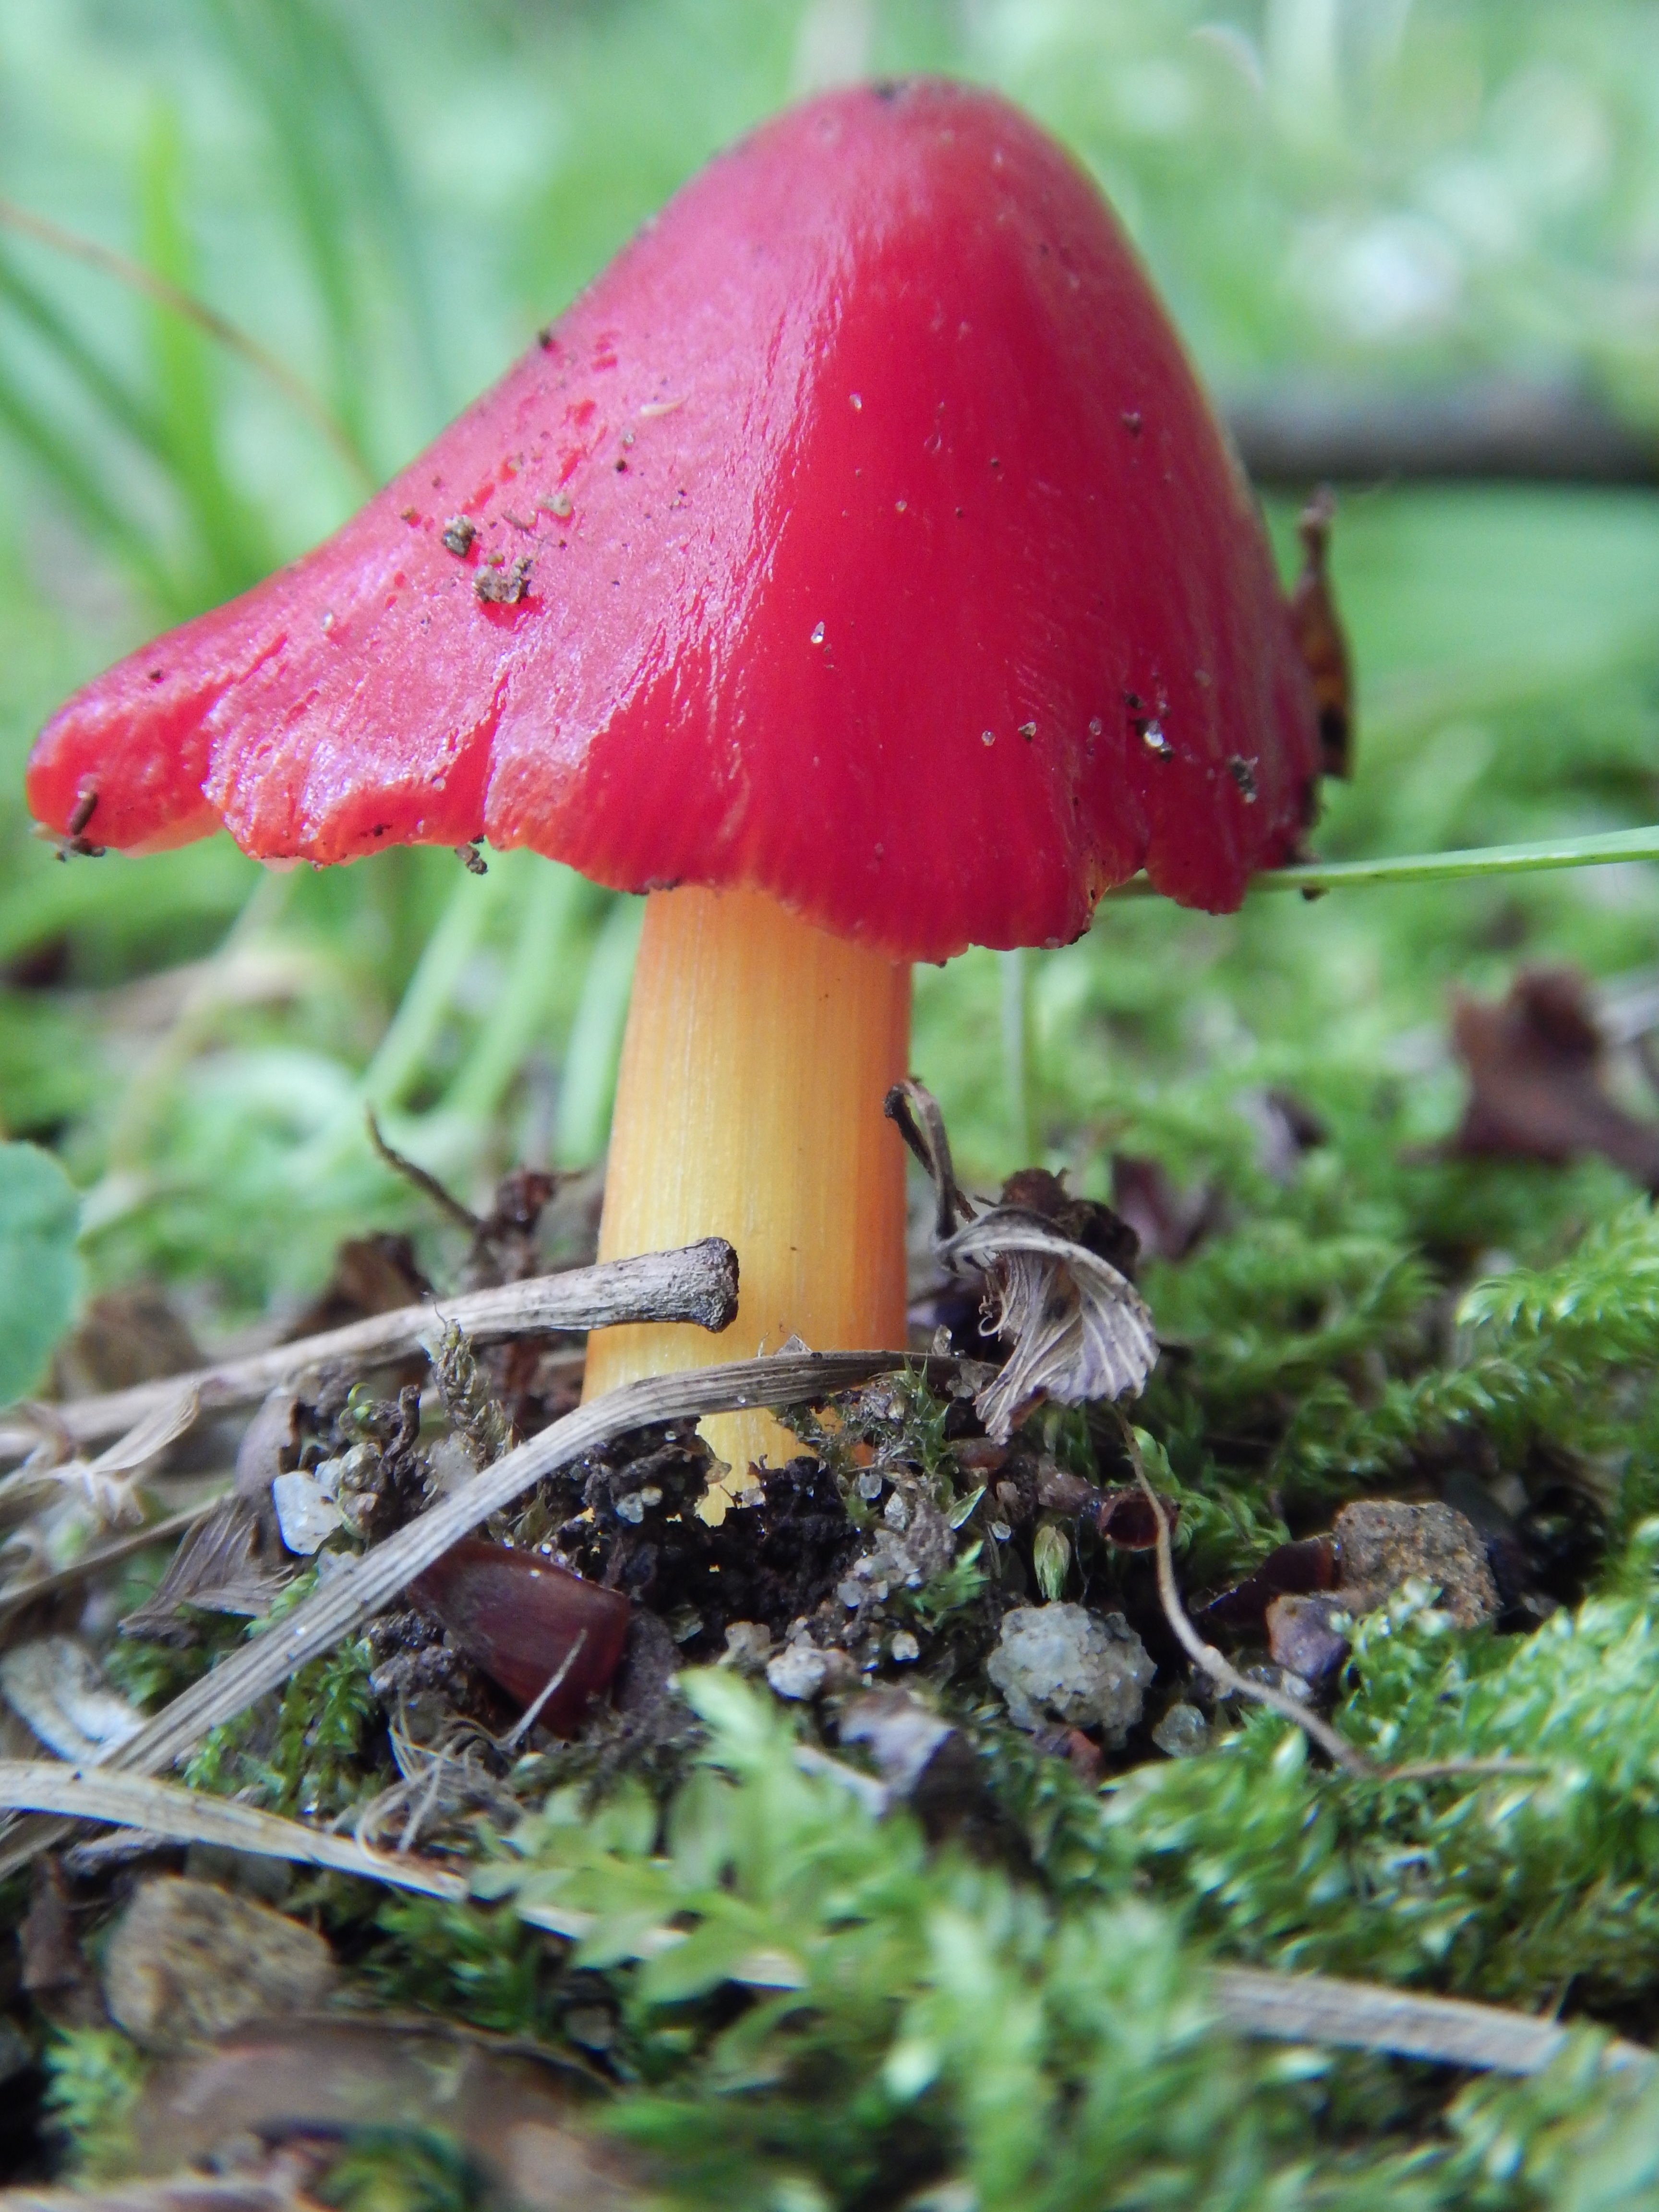 Waxy Cap Mushroom sp. © Copyright 2015 Awenda Provincial Park, All Rights Reserved